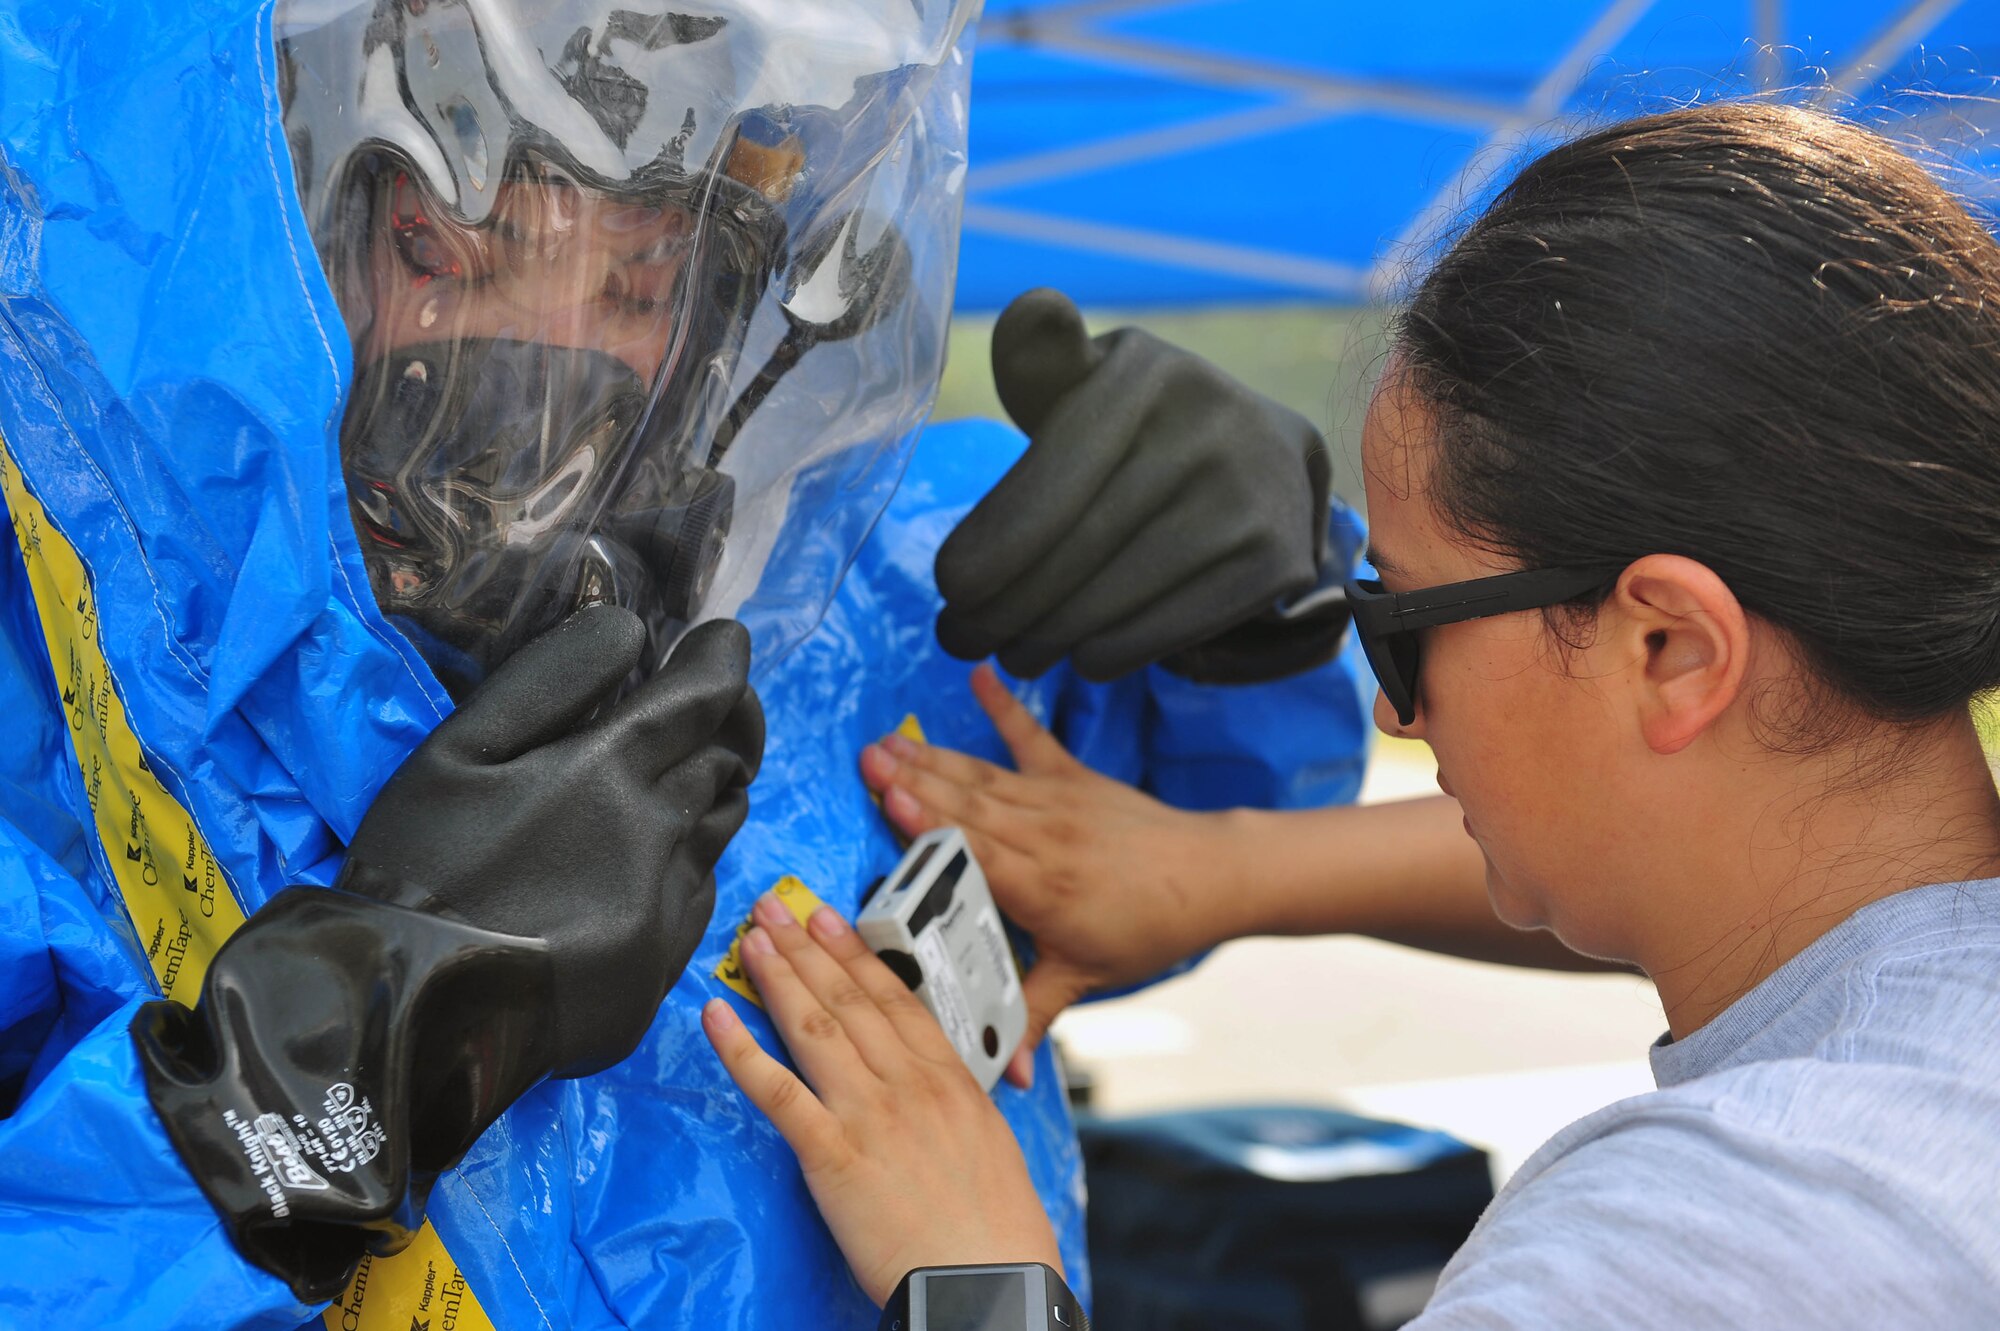 Senior Airman Andrea Spanjer, right, 4th Aerospace Medicine Squadron bioenvironmental engineer, attaches an electronic personal dosimeter to Airman 1st Class Amanda Vazquez-Lloret, 4th AMDS bioenvironmental engineer, during an integrated base emergency response capabilities training exercise, June 24, 2015, at Seymour Johnson Air Force Base, North Carolina. An EPD monitors exposure to radiation levels in real time and emits an audible and visual alarm when radiation presence is high. (U.S. Air Force photo/Senior Airman John Nieves Camacho)